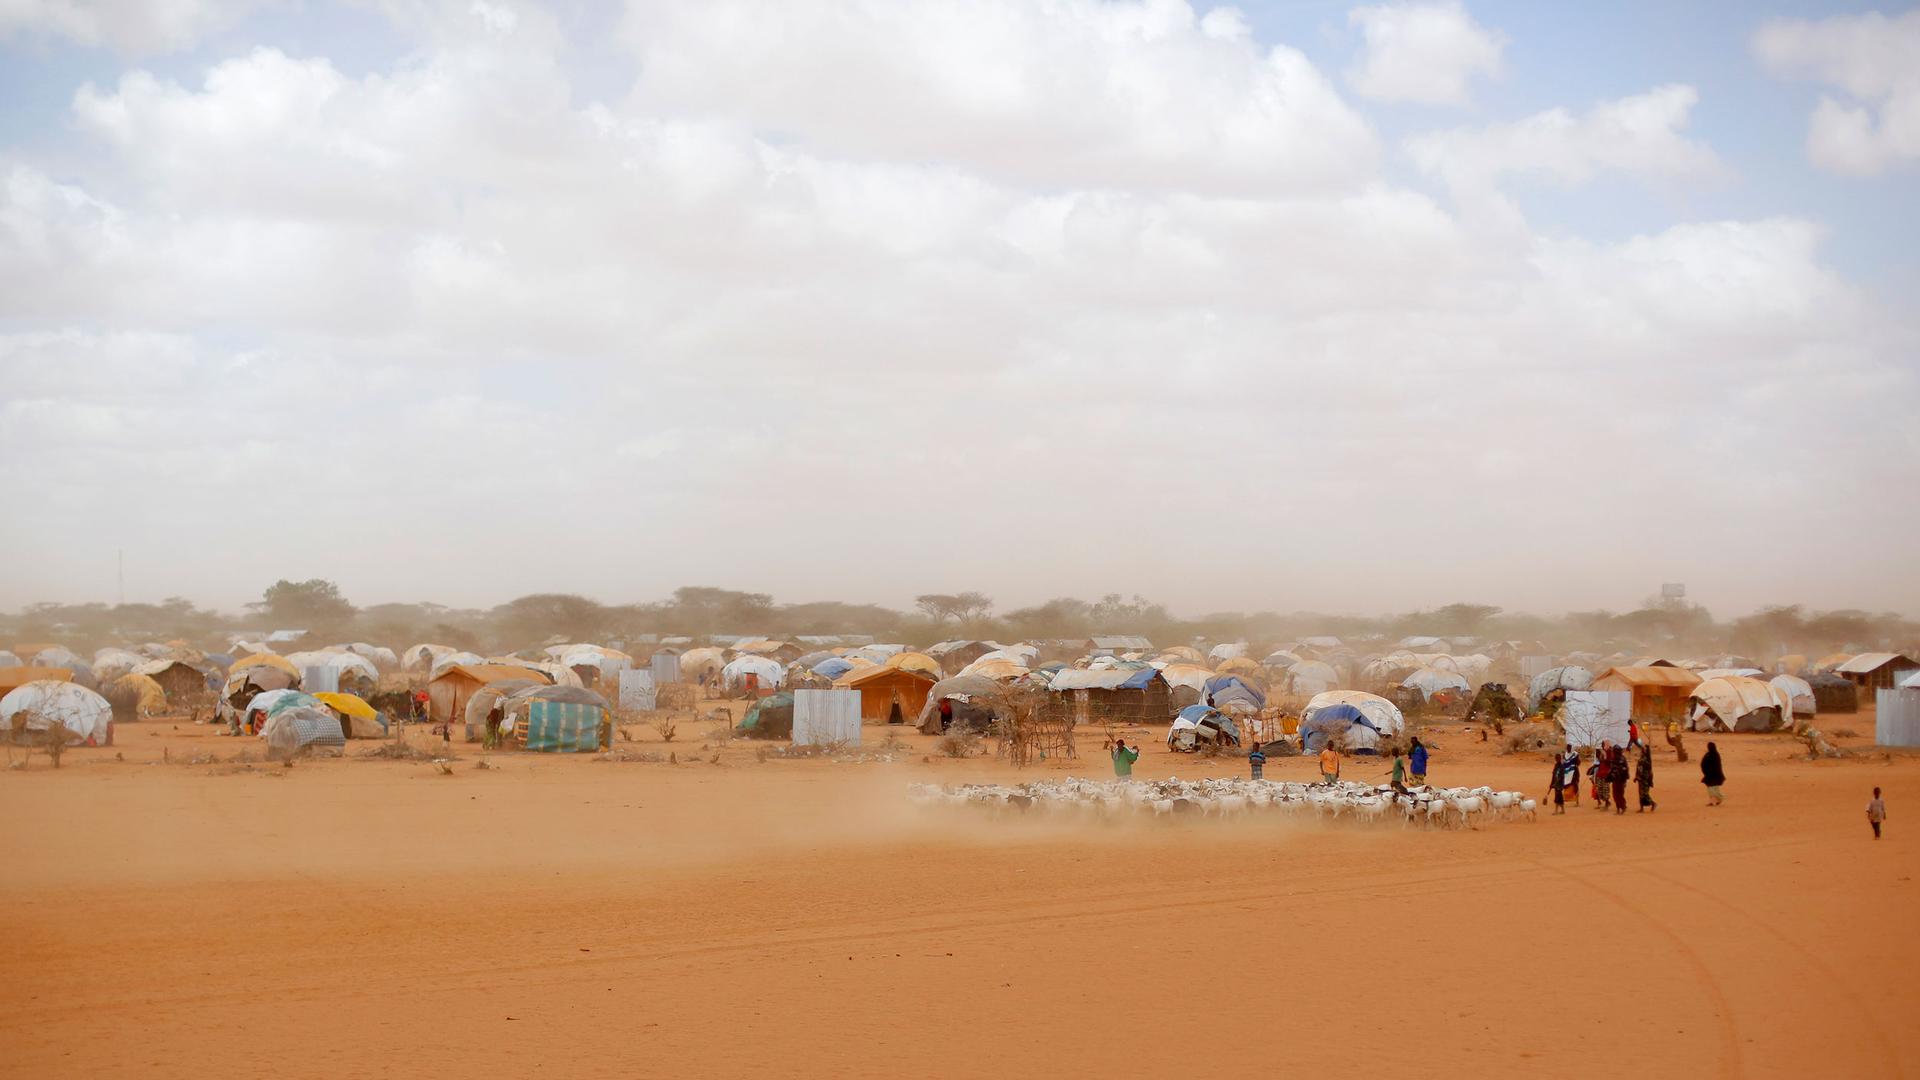 A large number of tents and other shelters are show in the distance with a group of people herding animals in the nearground.